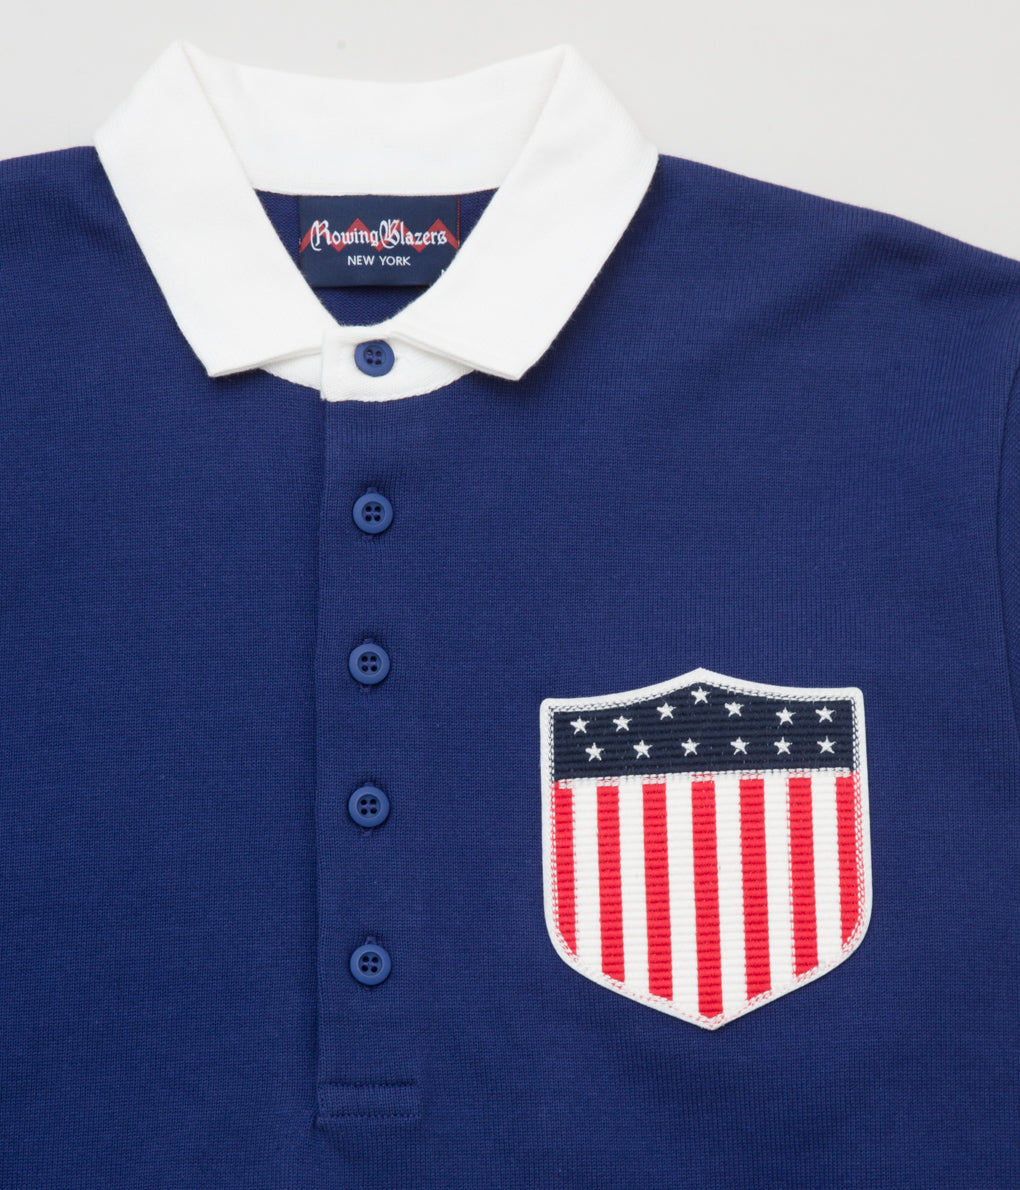 ROWING BLAZERS "USA RUGBY" (BLUE)